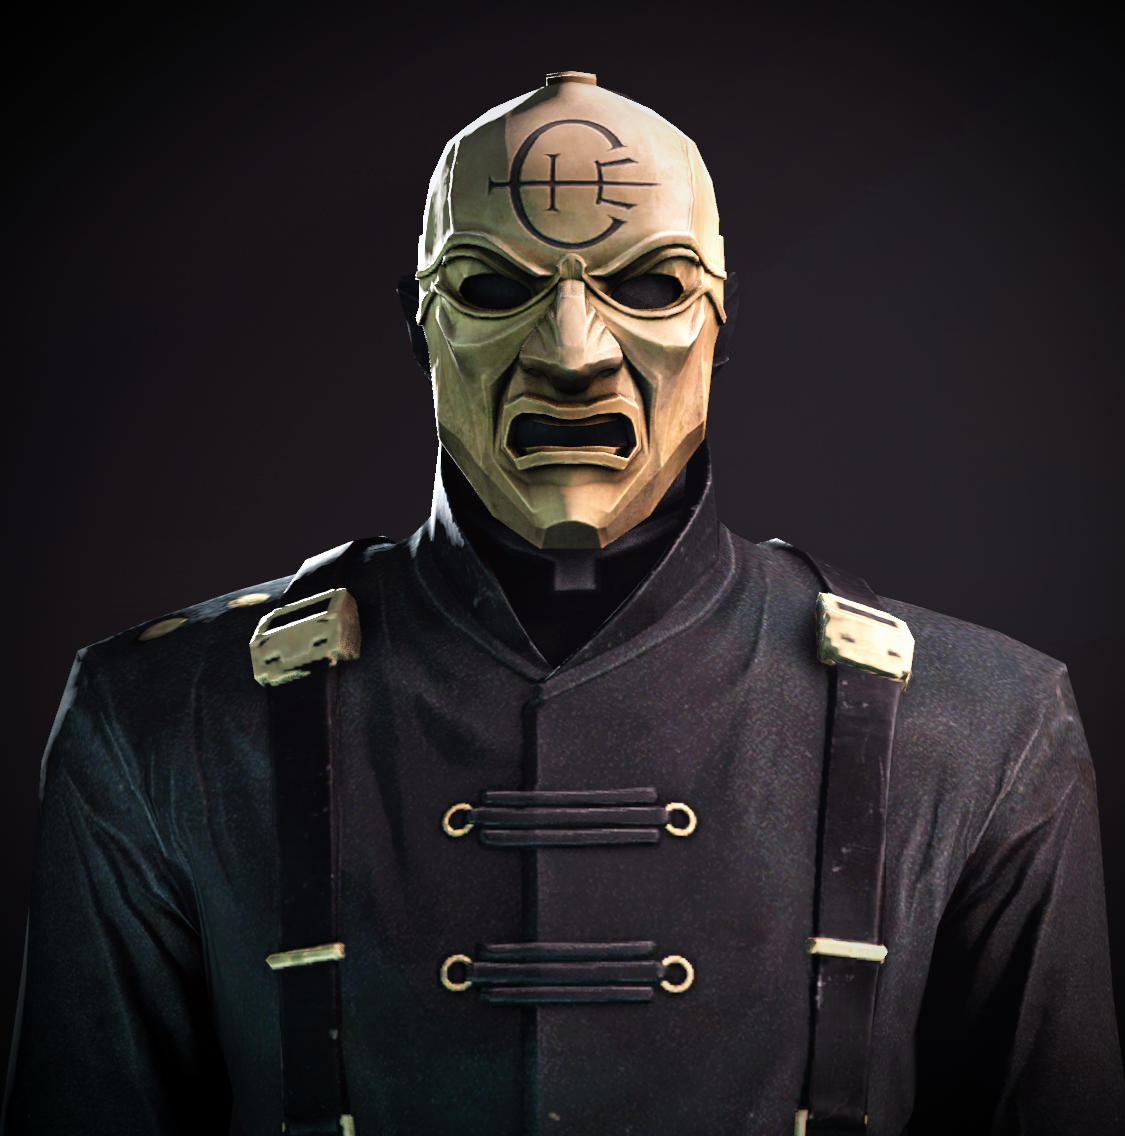 ENEMIES OF THE WORLD *UPDATED* for Dishonored